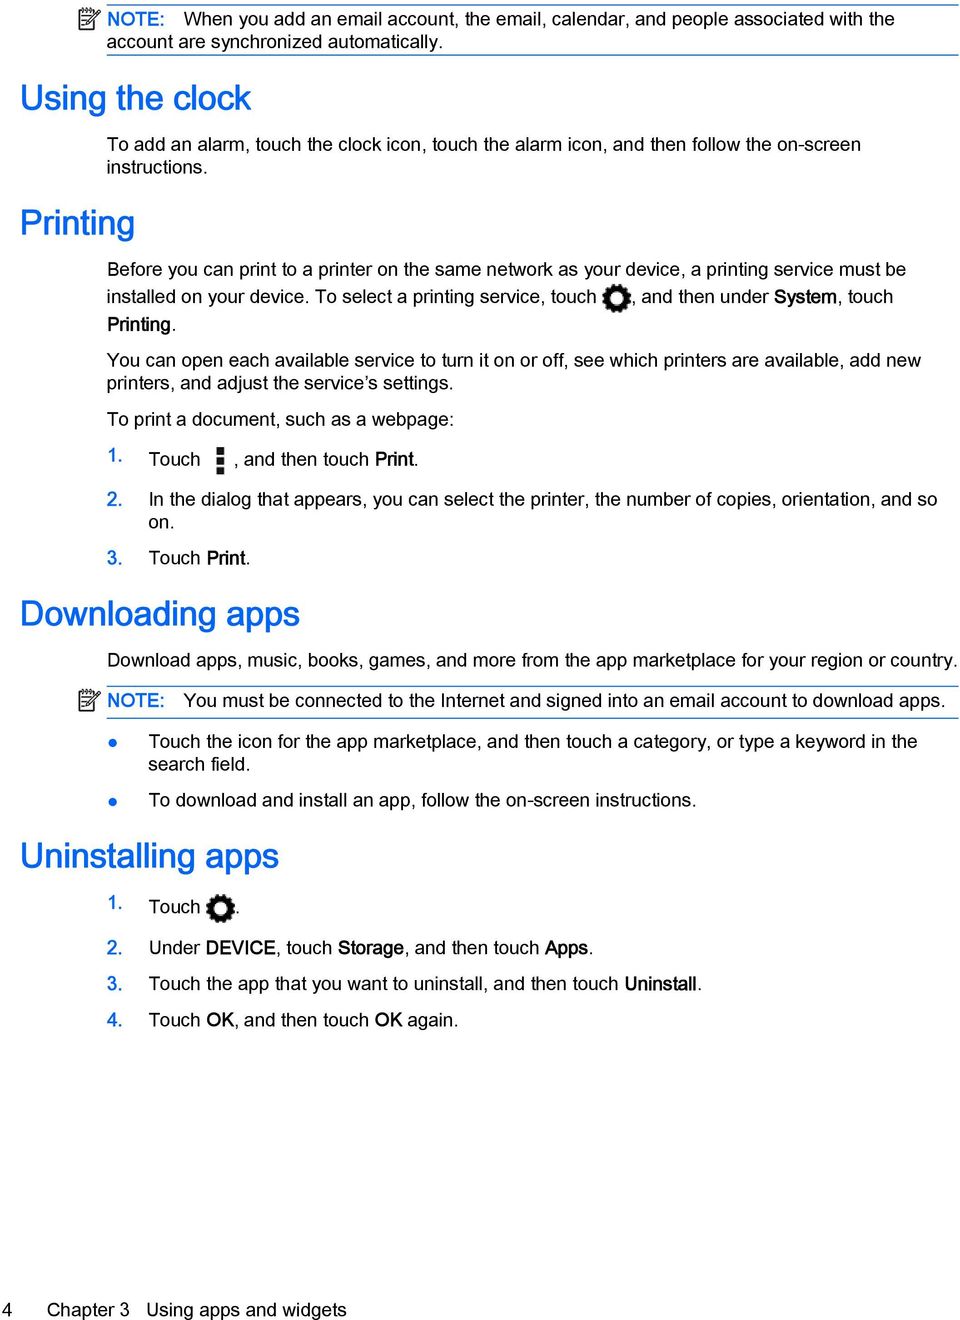 Before you can print to a printer on the same network as your device, a printing service must be installed on your device. To select a printing service, touch, and then under System, touch Printing.